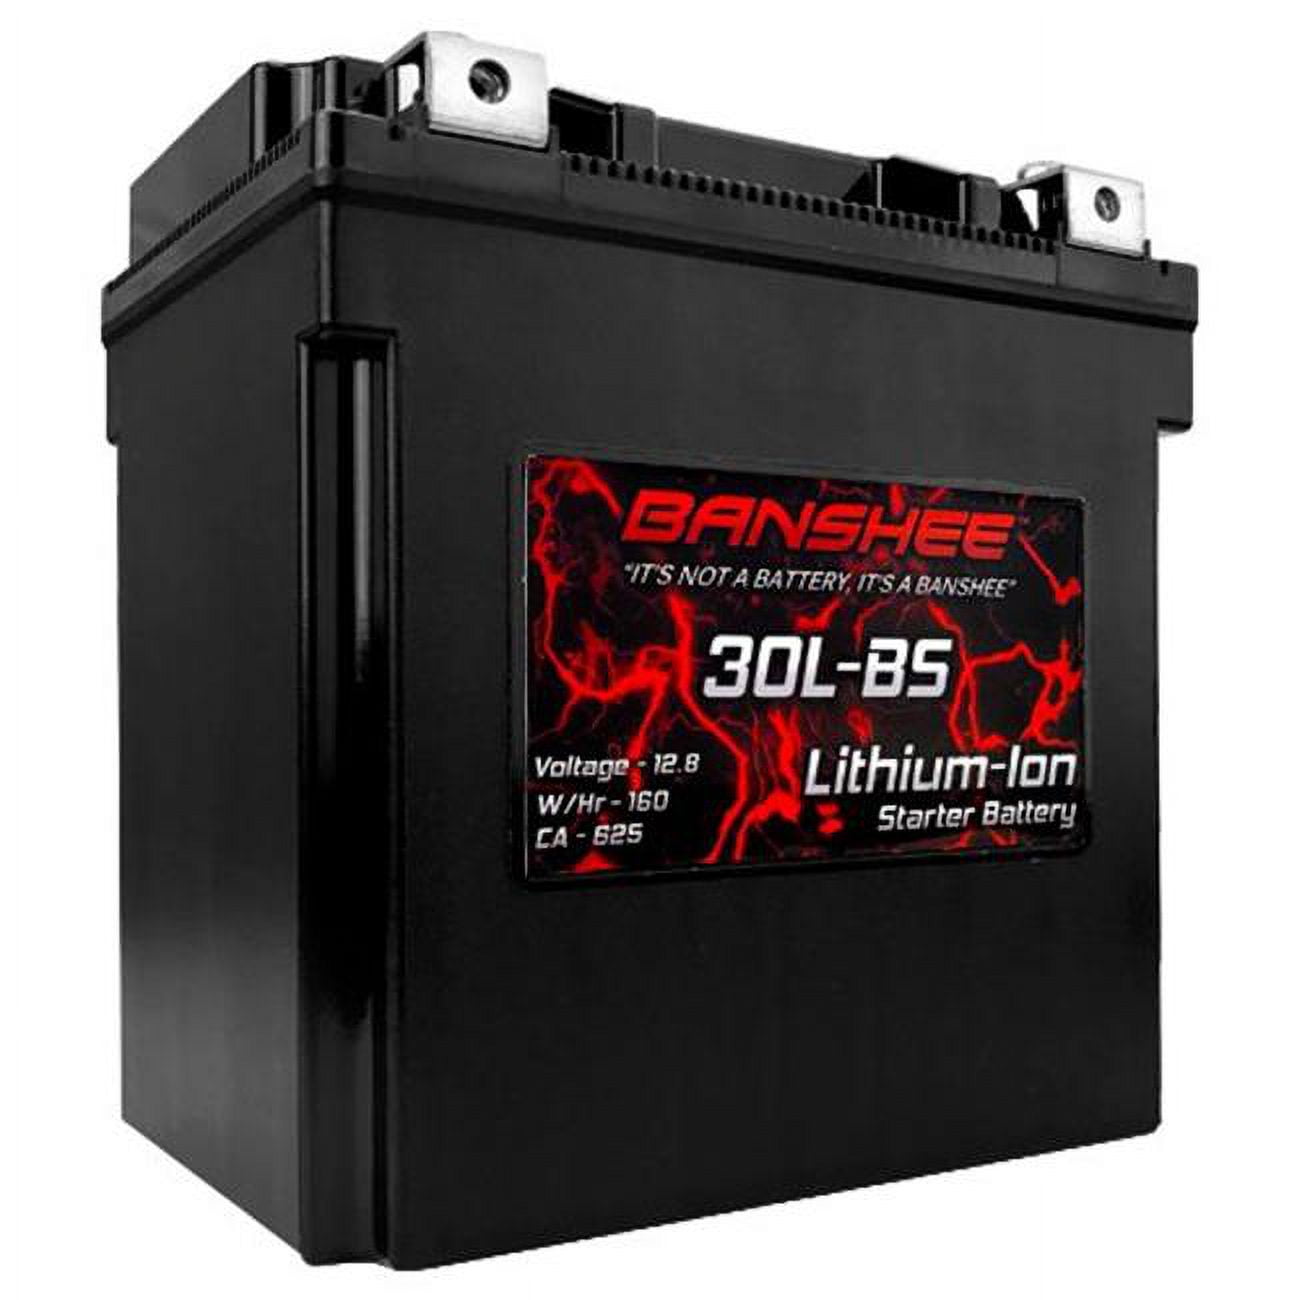 Picture of Banshee DLFP30L-BS-03 12.8V 30L-BS Lithium Ion Battery for Replacement Yuasa YIX30L YIX30L-BS Flush Terminals